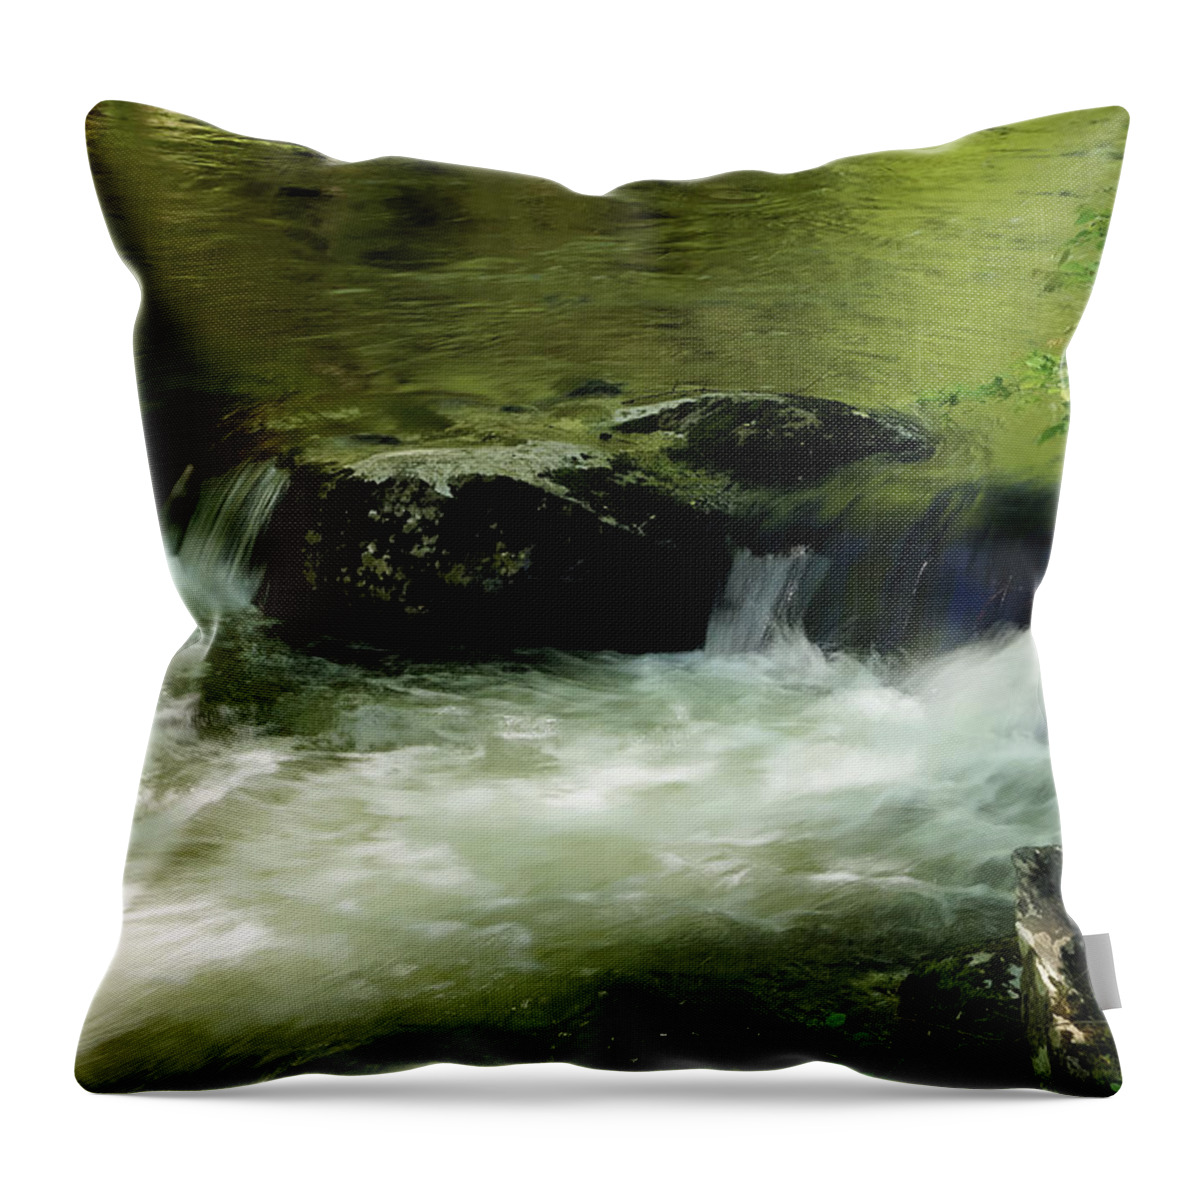 Mountain Stream Throw Pillow featuring the photograph Over The Rocks by TnBackroadsPhotos